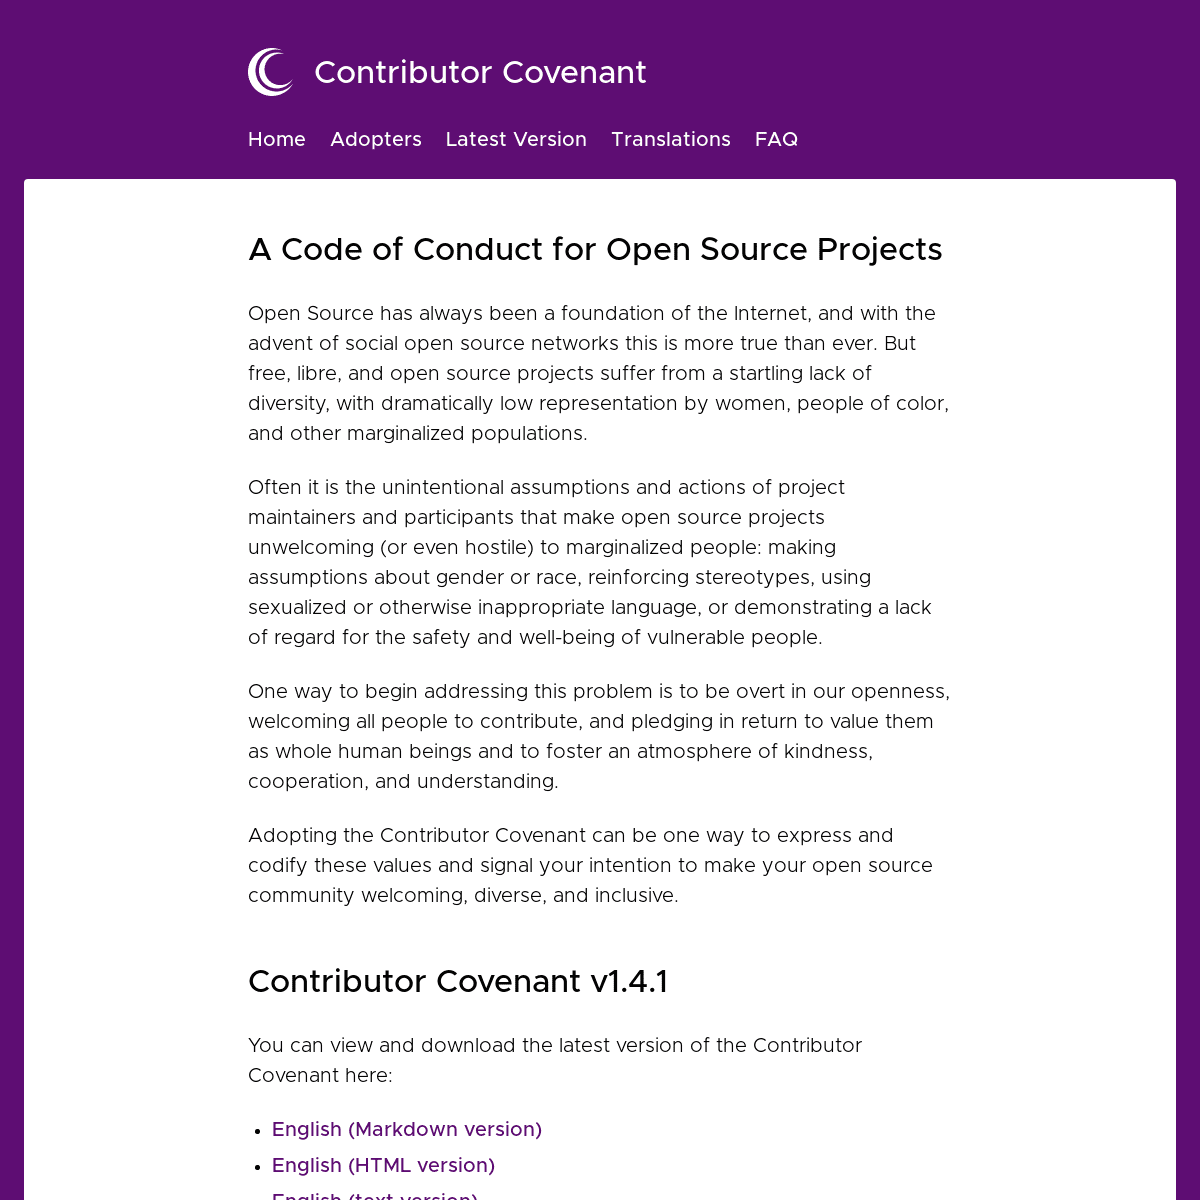 Contributor Covenant: A Code of Conduct for Open Source Projects